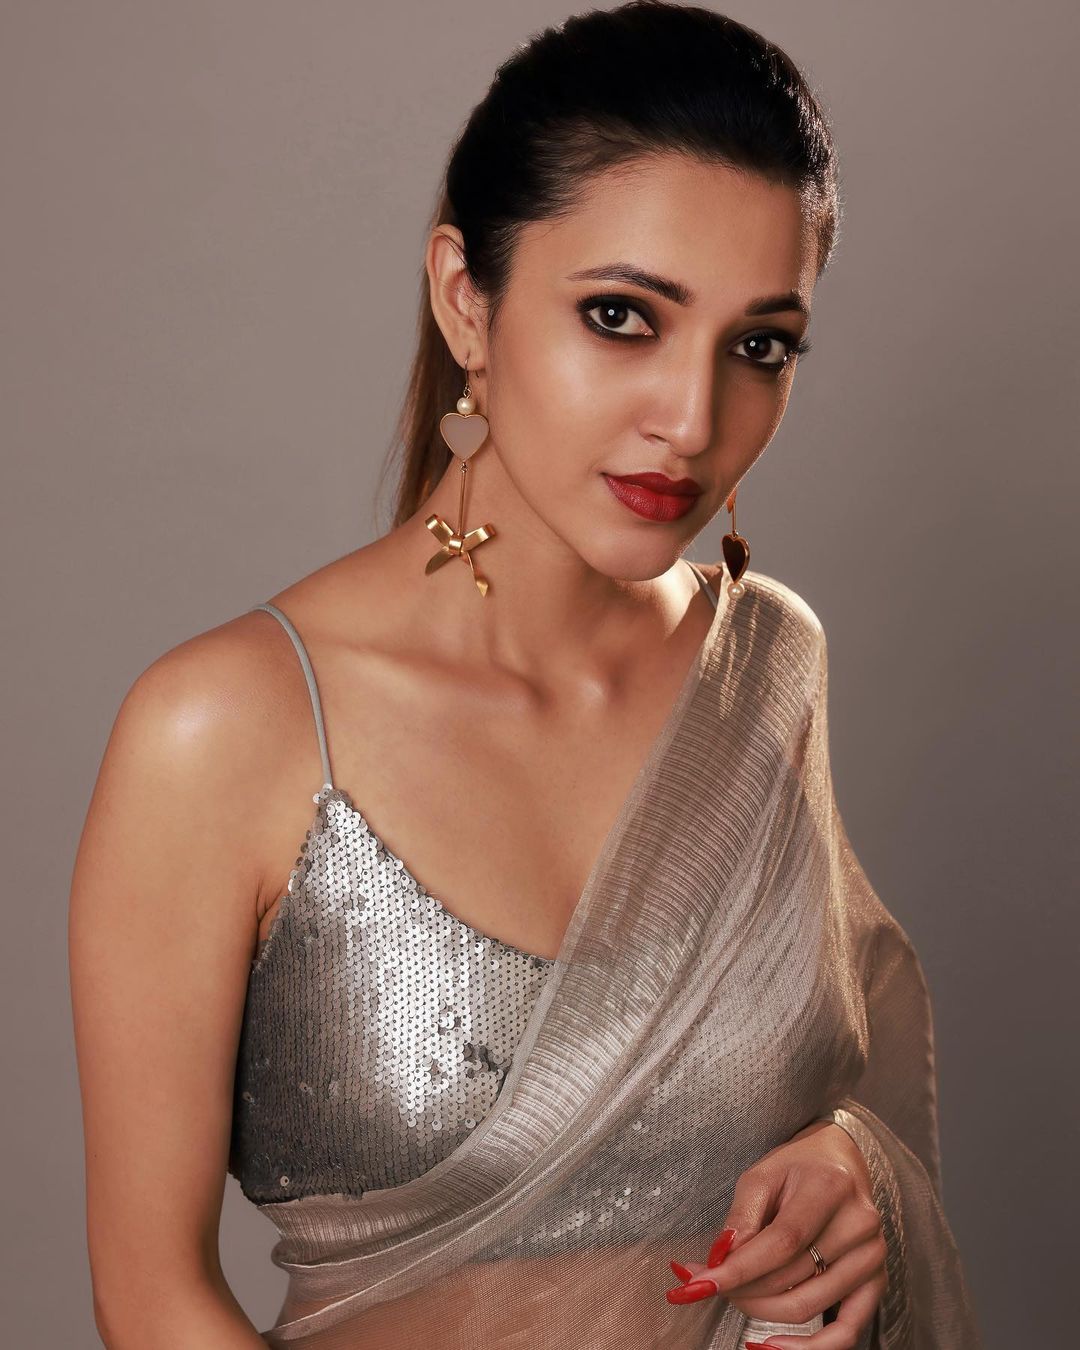 Neha Shetty looks stunning in the grey saree with the silver sequinned blouse